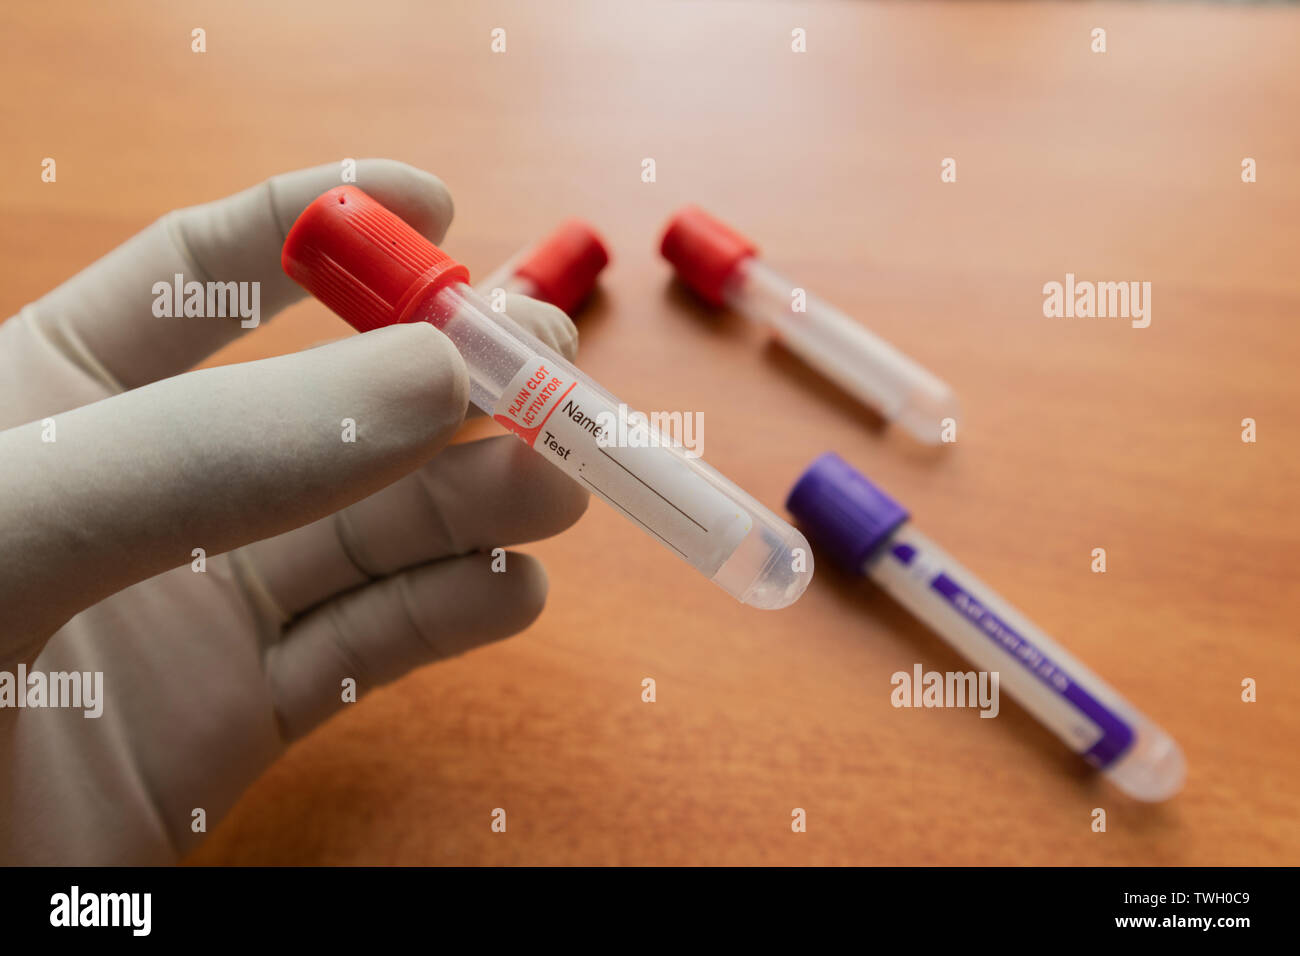 Pro-coagulation Plain Clot Activator blood collection tube,with red plastic stopper held by hand In Laboratory. Stock Photo